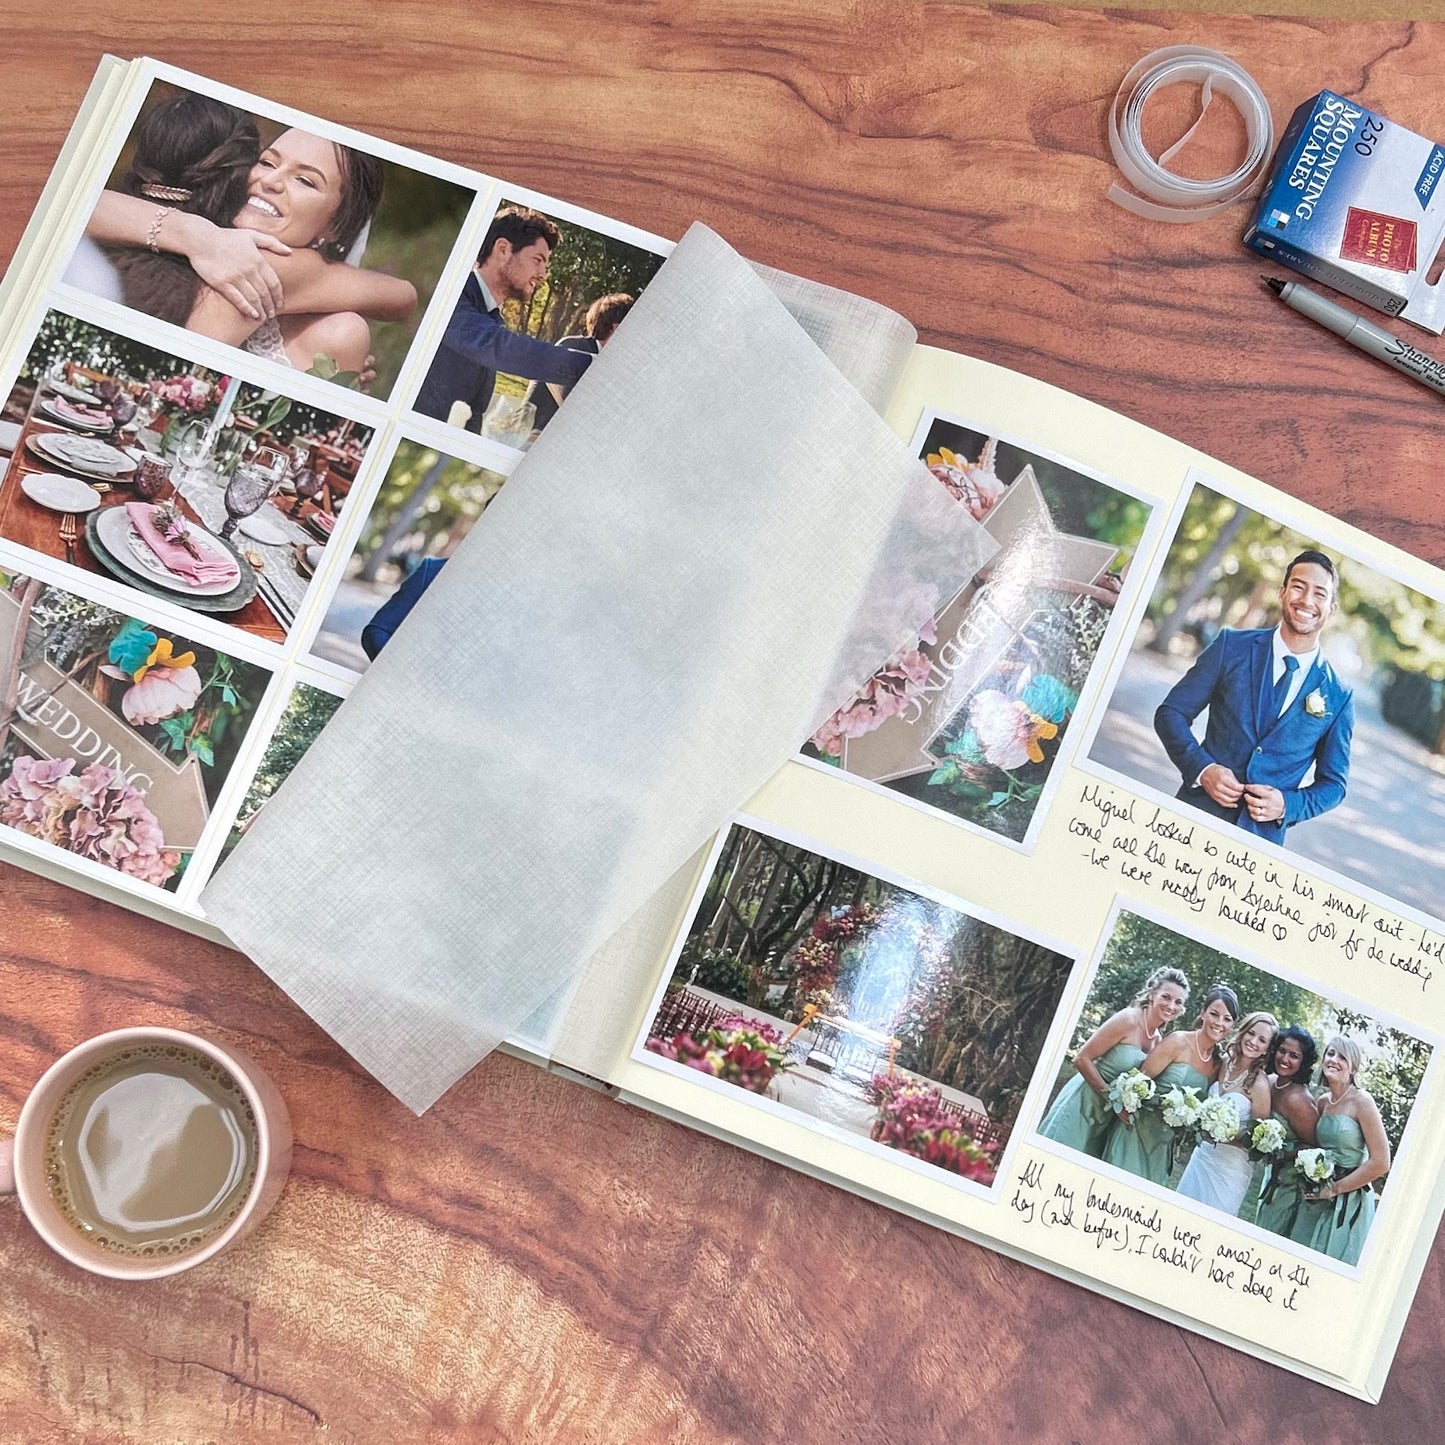 How to create your own wedding album - Canon Cyprus